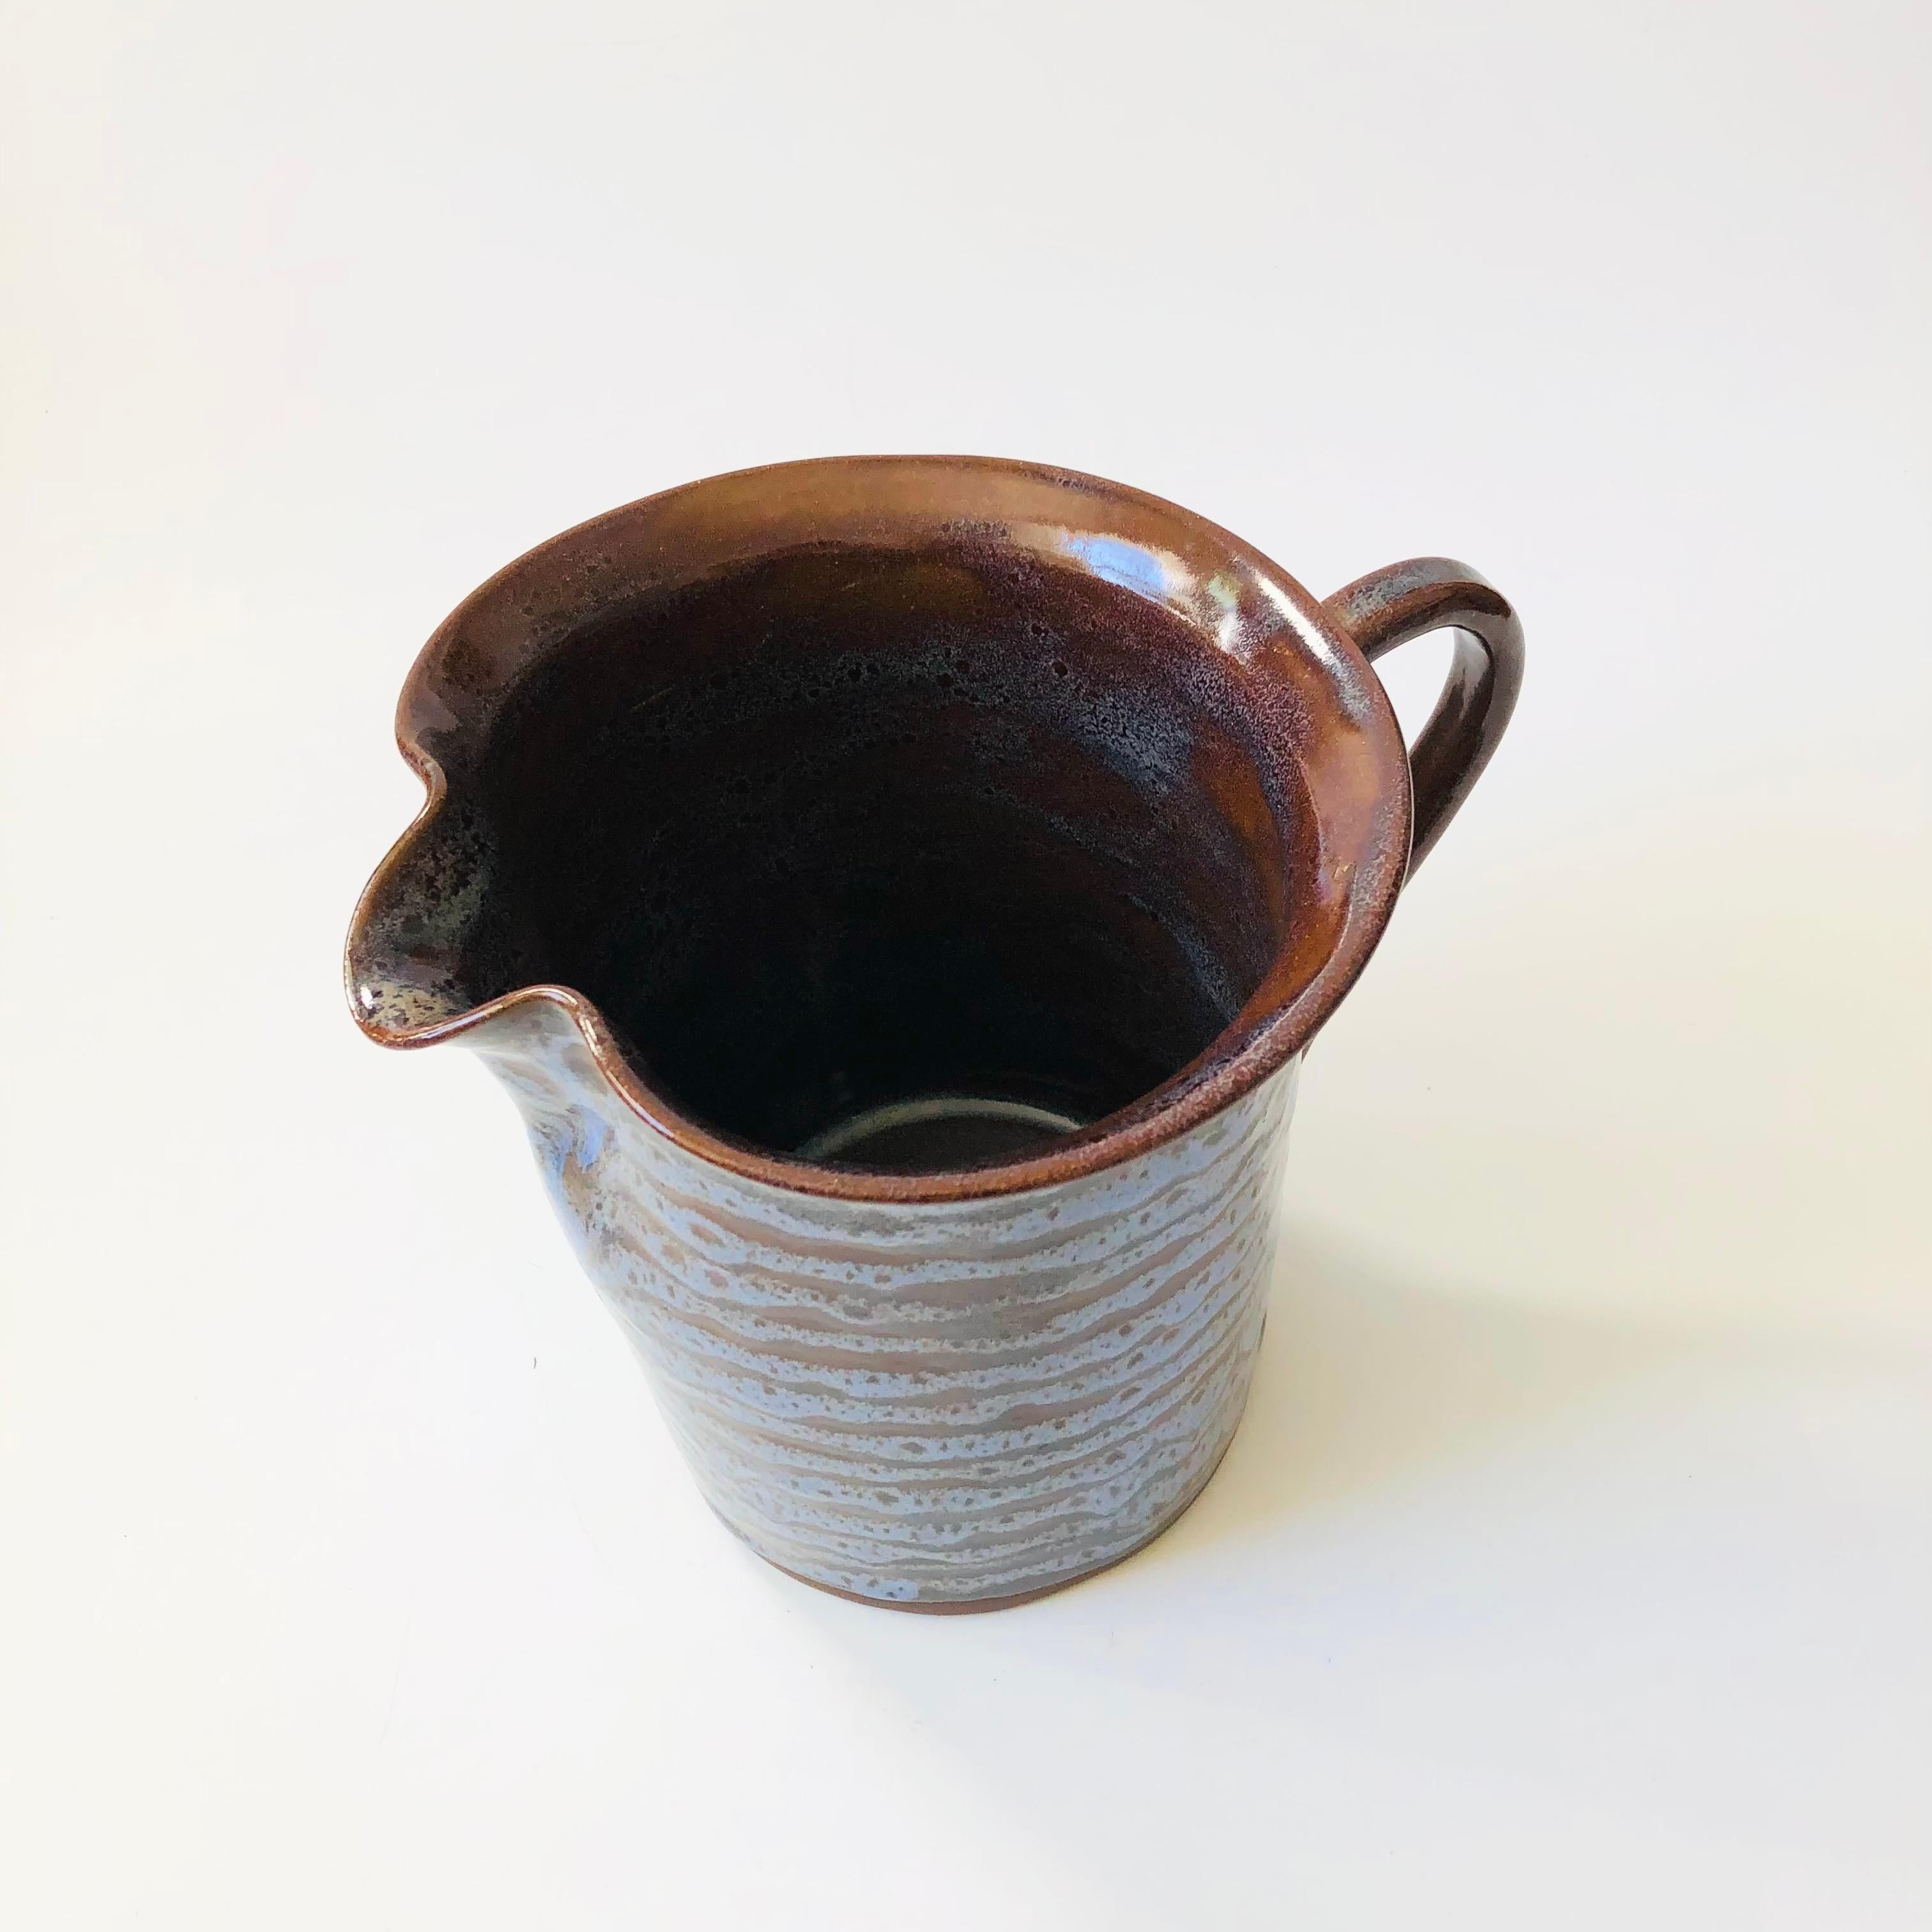 A vintage studio pottery pitcher by Northern California pottery, Niels Frederiksen (1917 - 2005).
Nice large size, finished in blue and brown glazes. Signed on the base.

